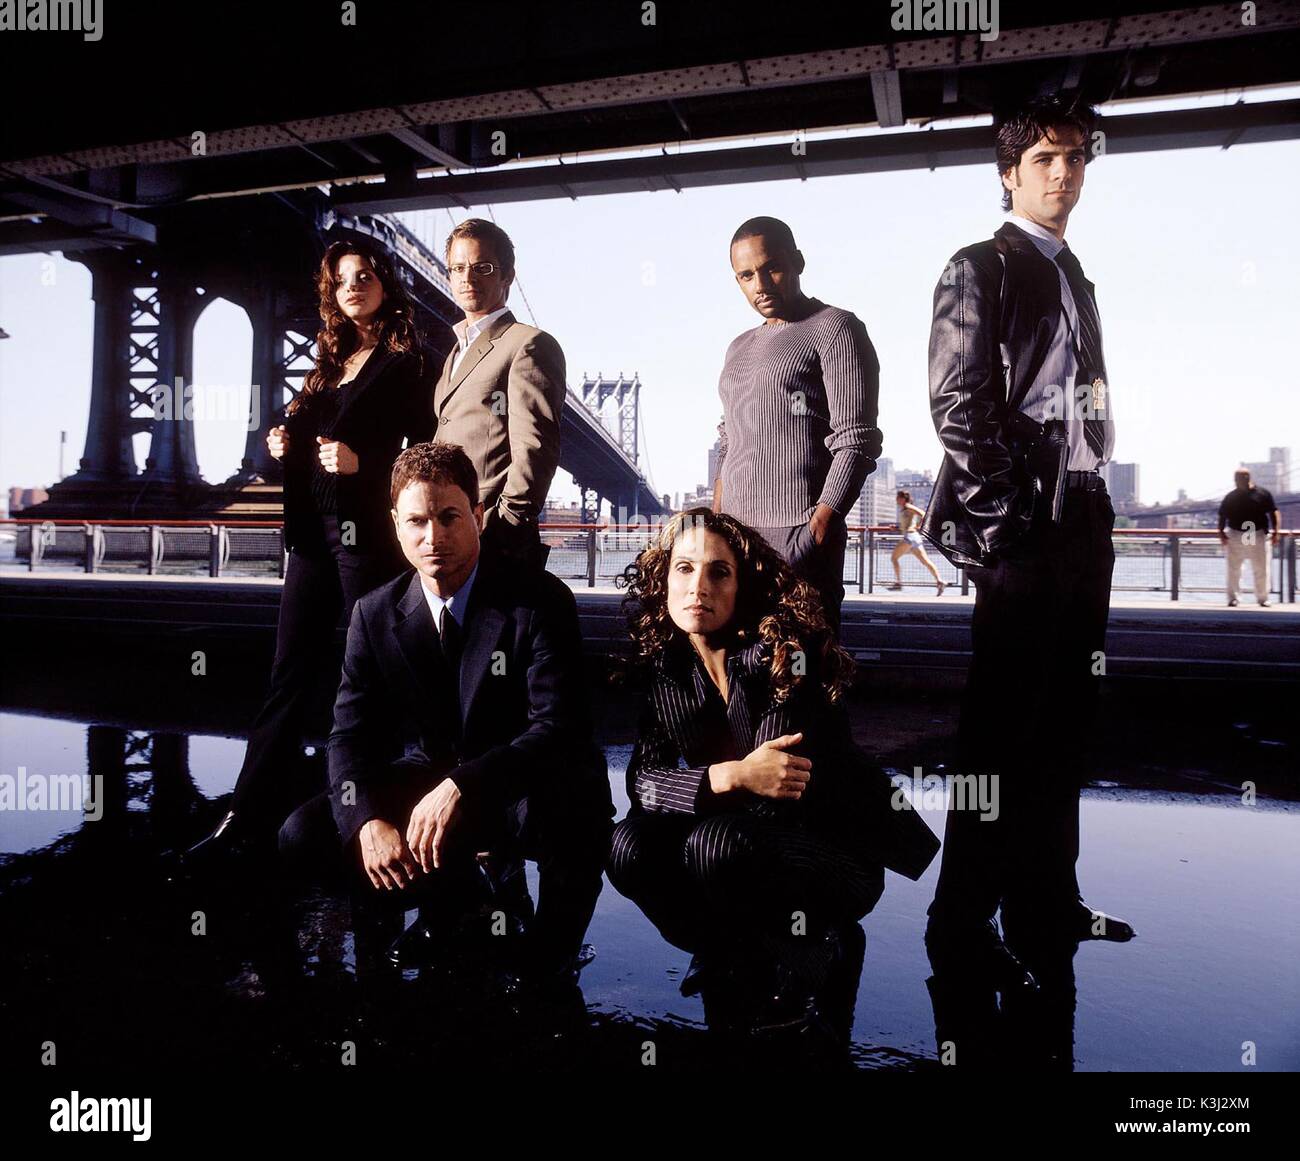 (Back, L-R) VENESSA FERLITO, CARMINE GIOVINAZZO, HILL HARPER, and EDDIE CAHILL. (Front, L-R) GARY SINISE and MELINA KANAKAREDES. Licensed by CHANNEL 5 BROADCASTING. Five Stills: 0207 550 5509. Free for editorial press and listings use in connection with the current broadcast of Channel 5 programmes only. This Image may only be reproduced with the prior written consent of Channel 5. Not for any form of advertising, internet use or in connection with the sale of any product. CSI: NY aka CSI: NEW YORK VANESSA FERLITO as Det. Aiden Burn, CARMINE GIOVINAZZO as Det. Danny Messer, HILL HARPER as Dr. Stock Photo